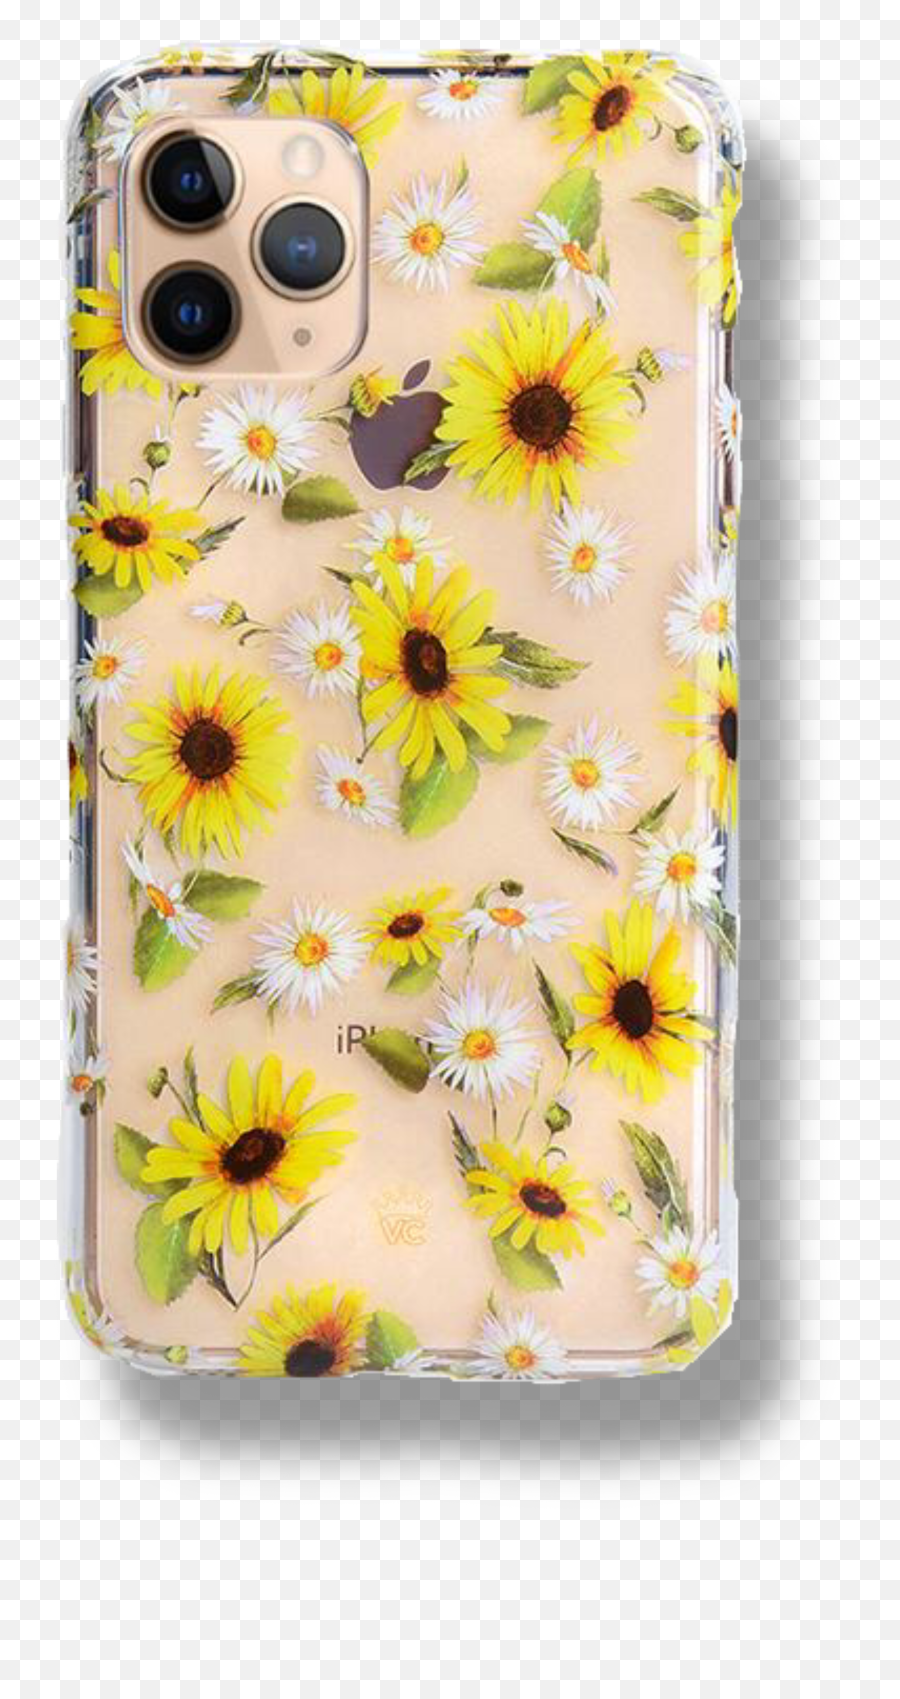 The Most Edited Iphone5 Picsart - Daisy Phone Cases For Iphone 11 Emoji,Iphone 5c Cases Emojis